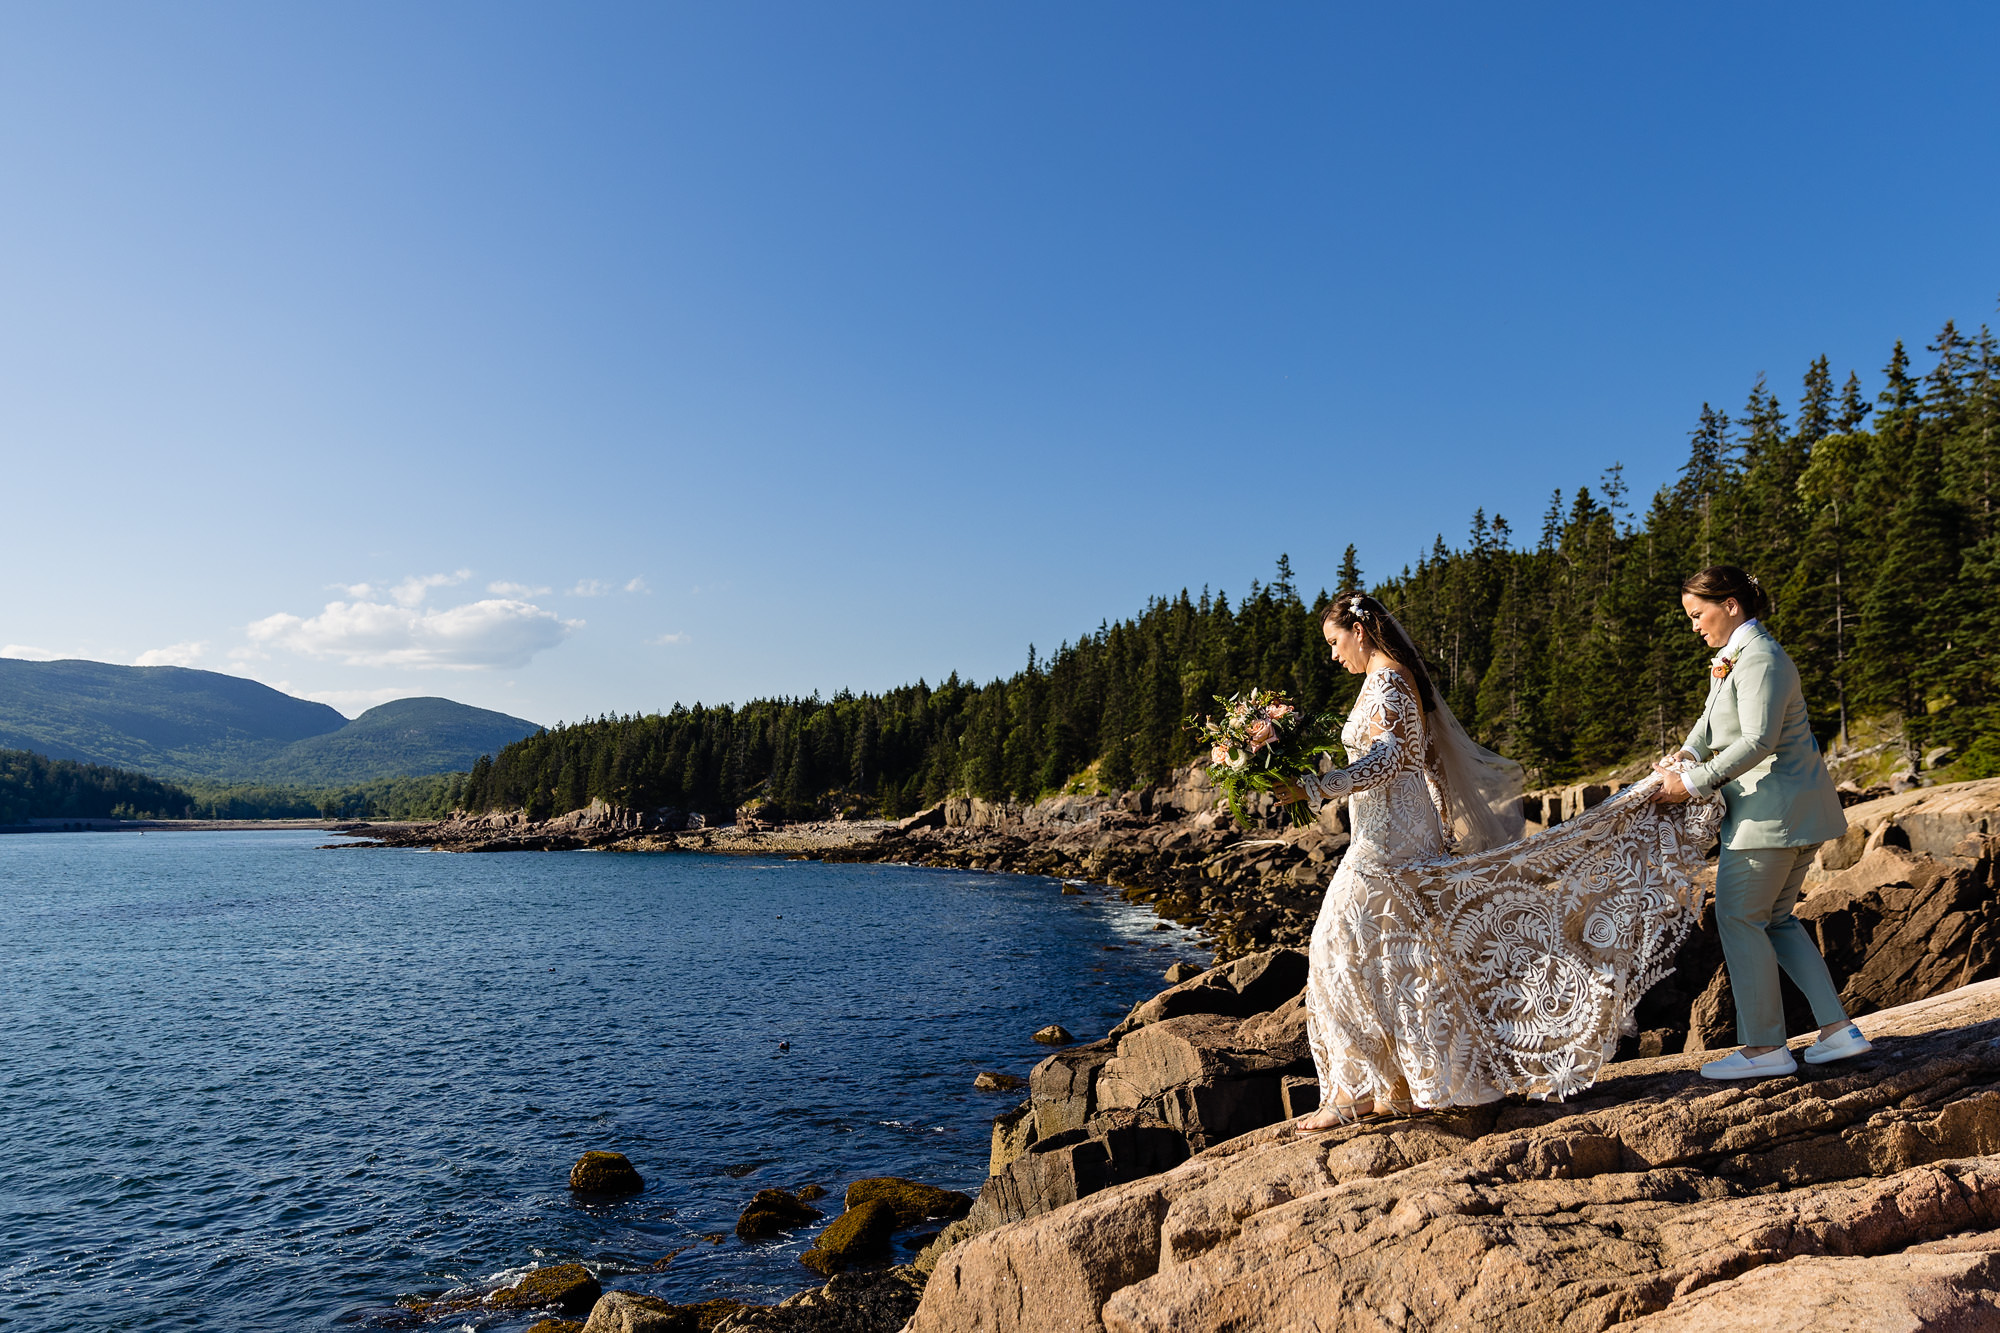 The two brides take some dramatic portraits on the cliffs of Acadia